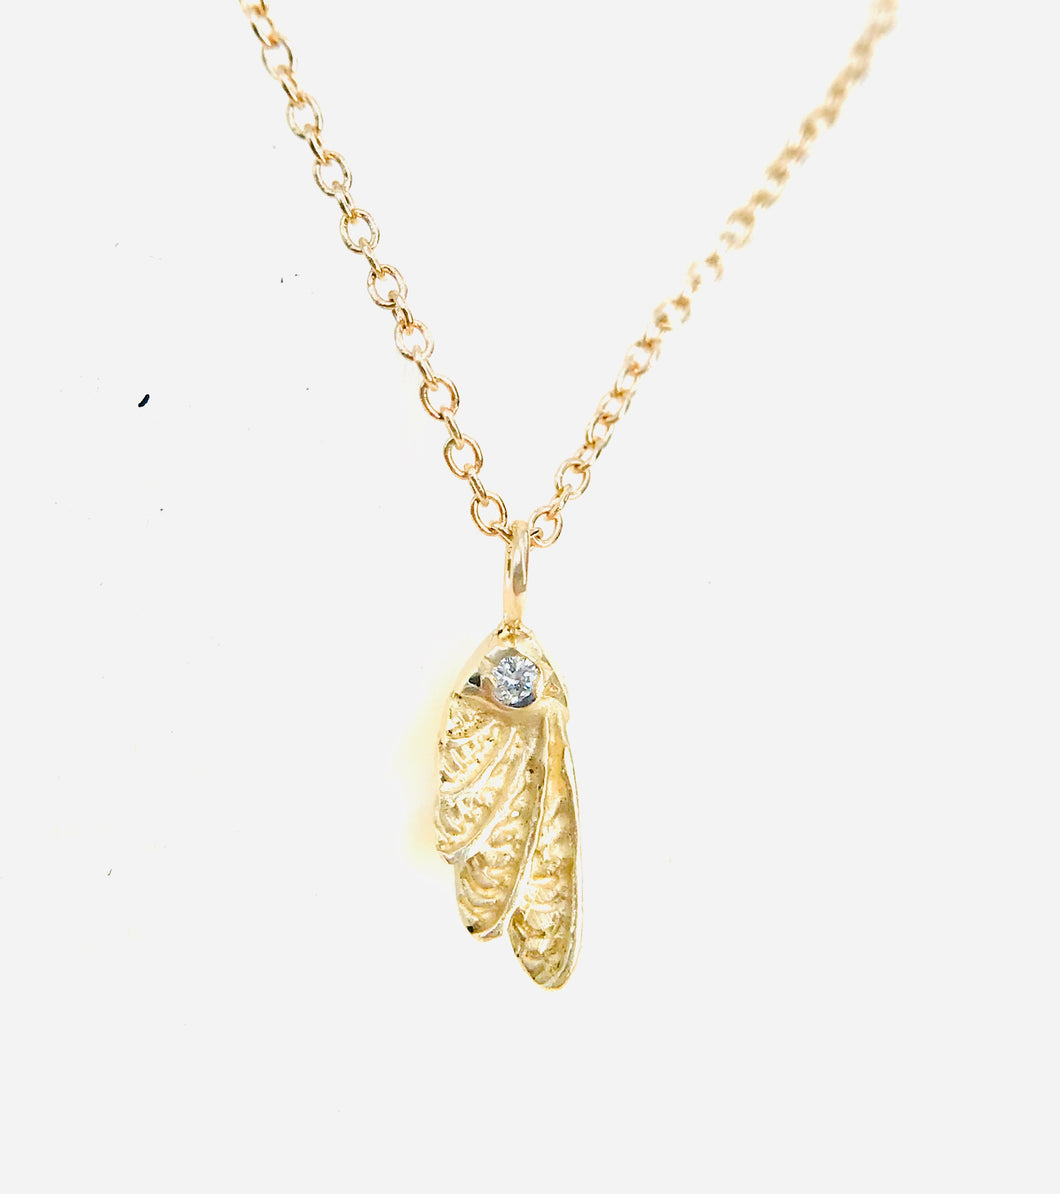 Small Angel Wing Diamond Necklace